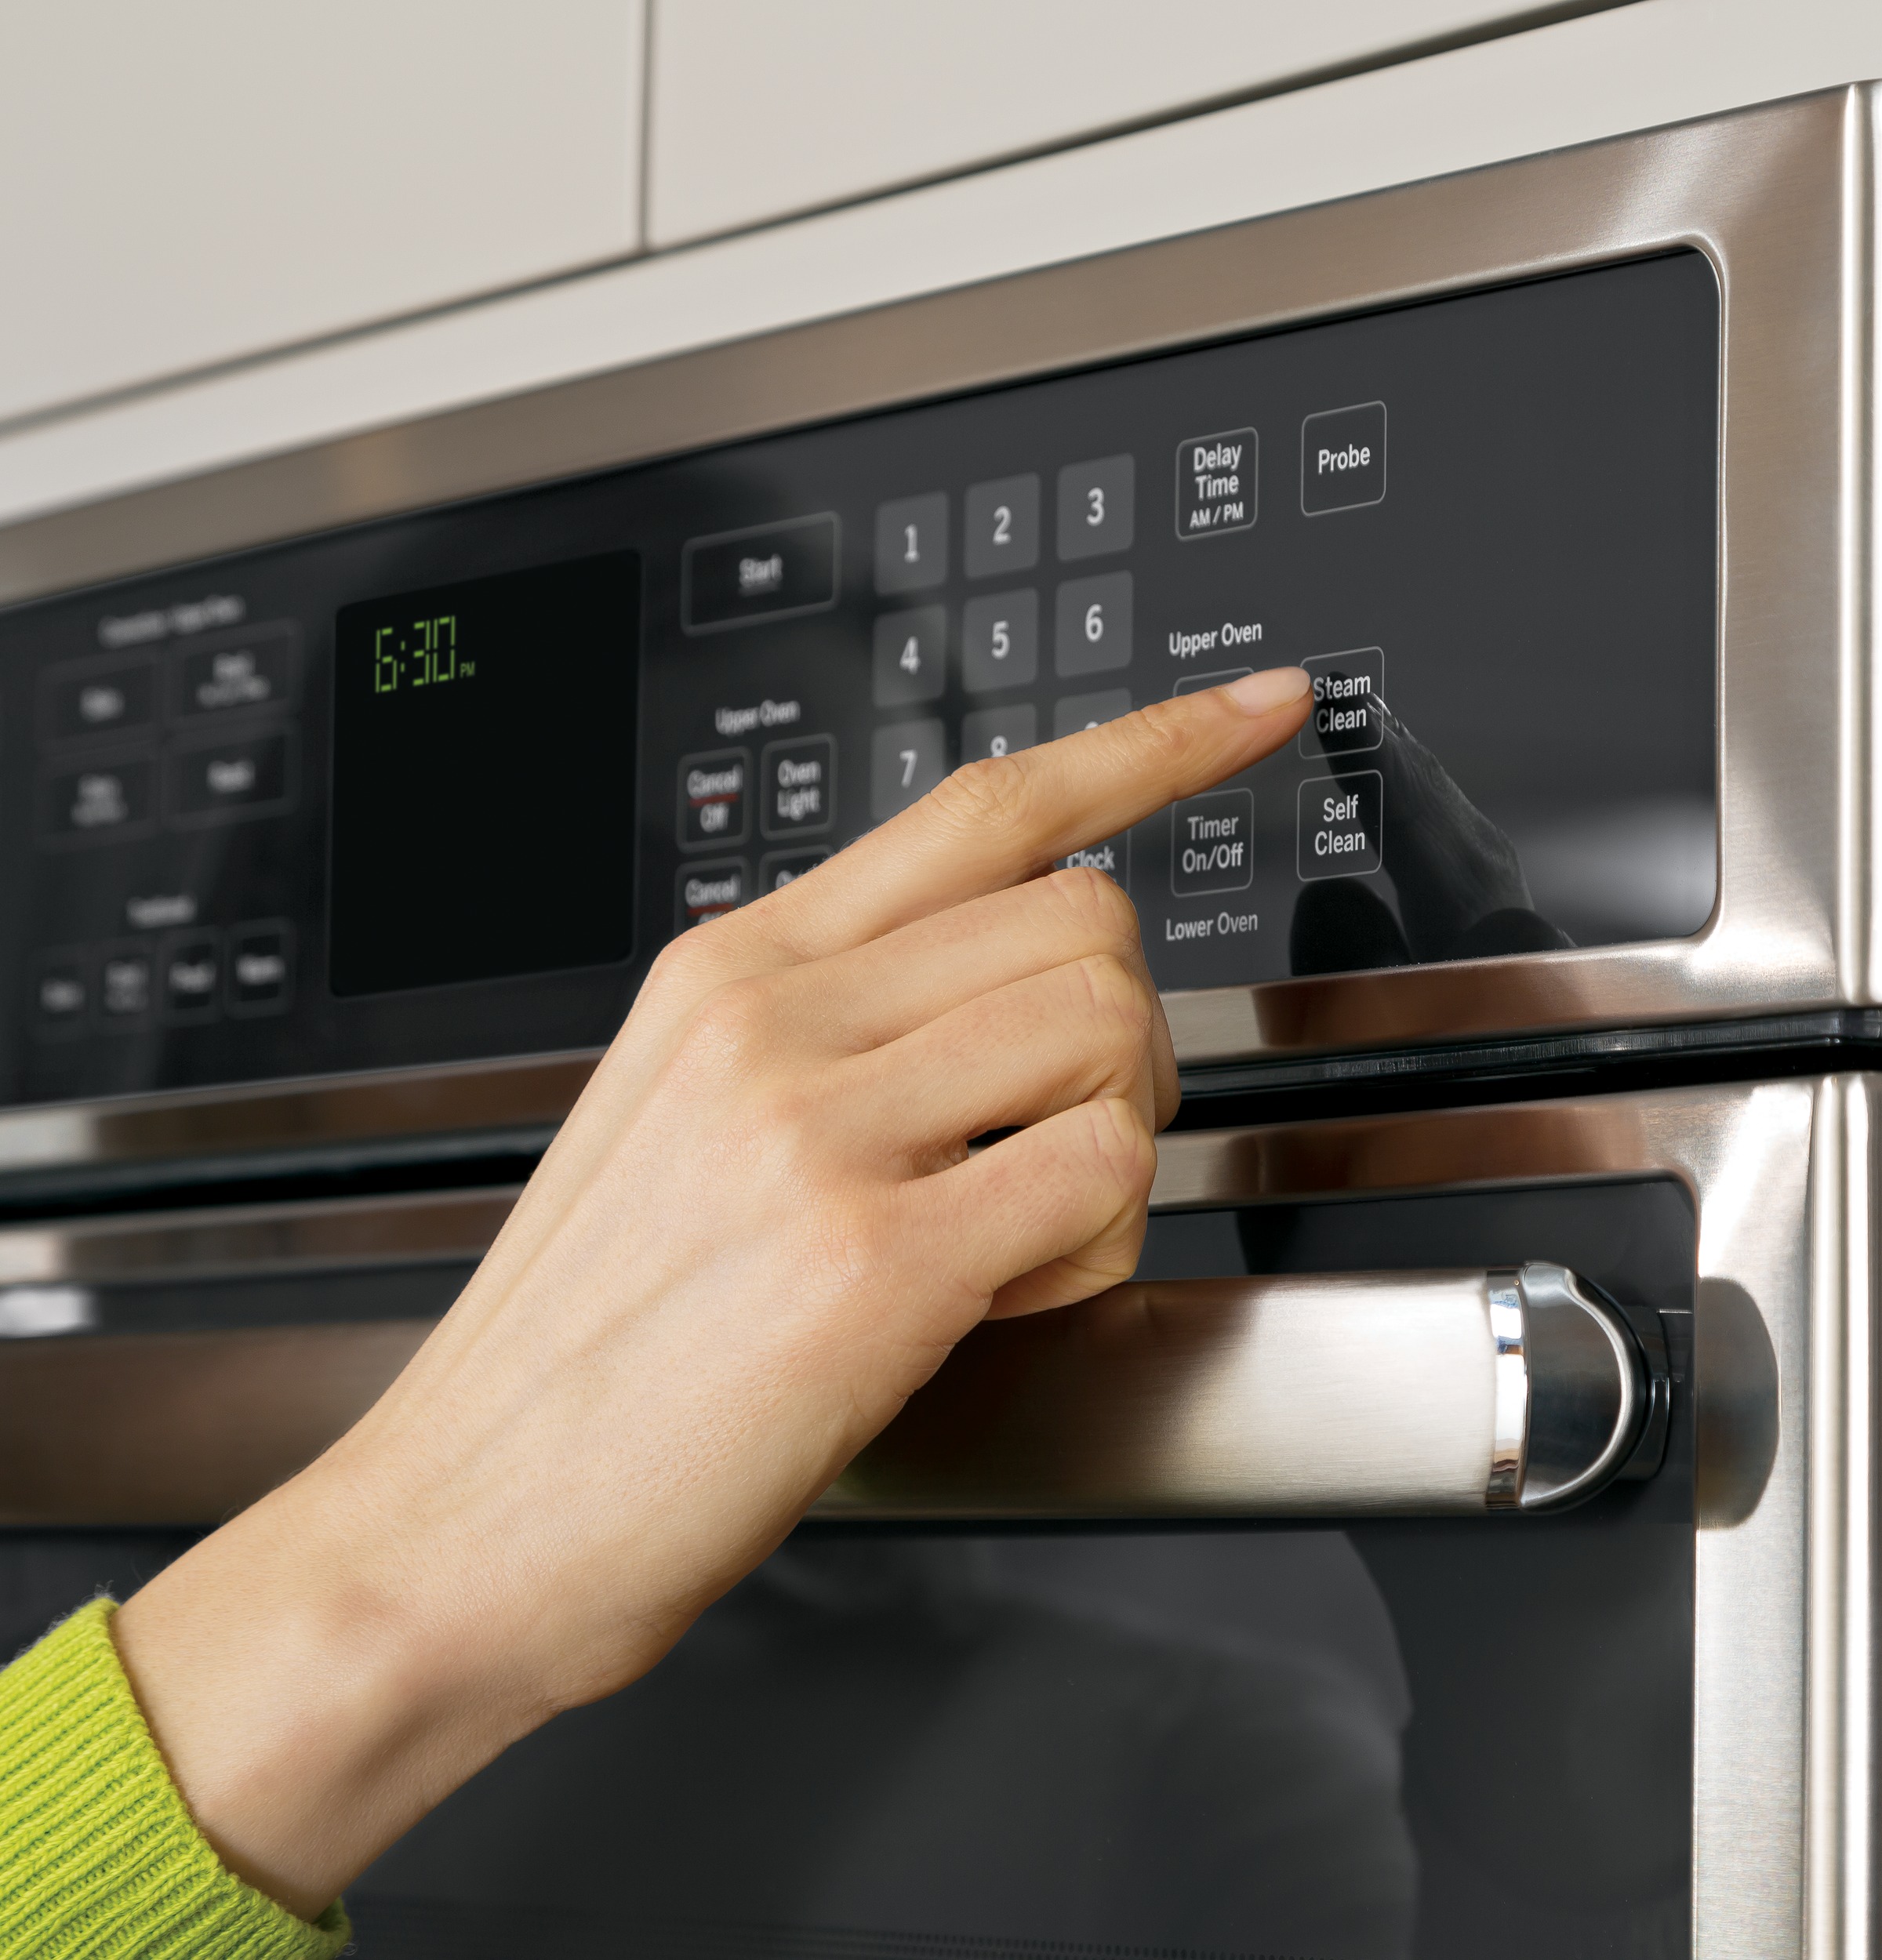 How to Turn off Steam Clean on Ge Oven 